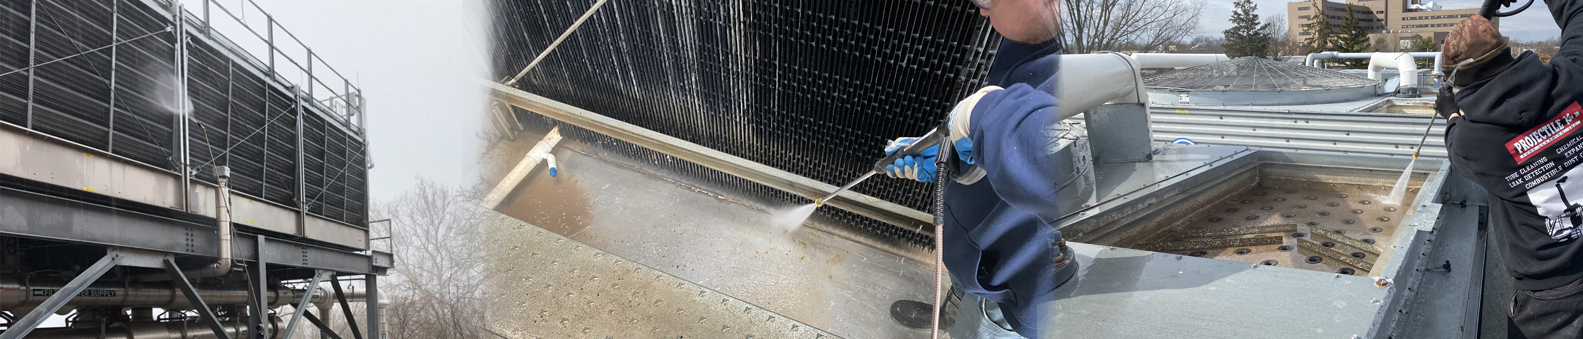 https://www.projectiletube.com/wp-content/uploads/2020/05/Cooling-Tower-Cleaning-banner-img.jpg